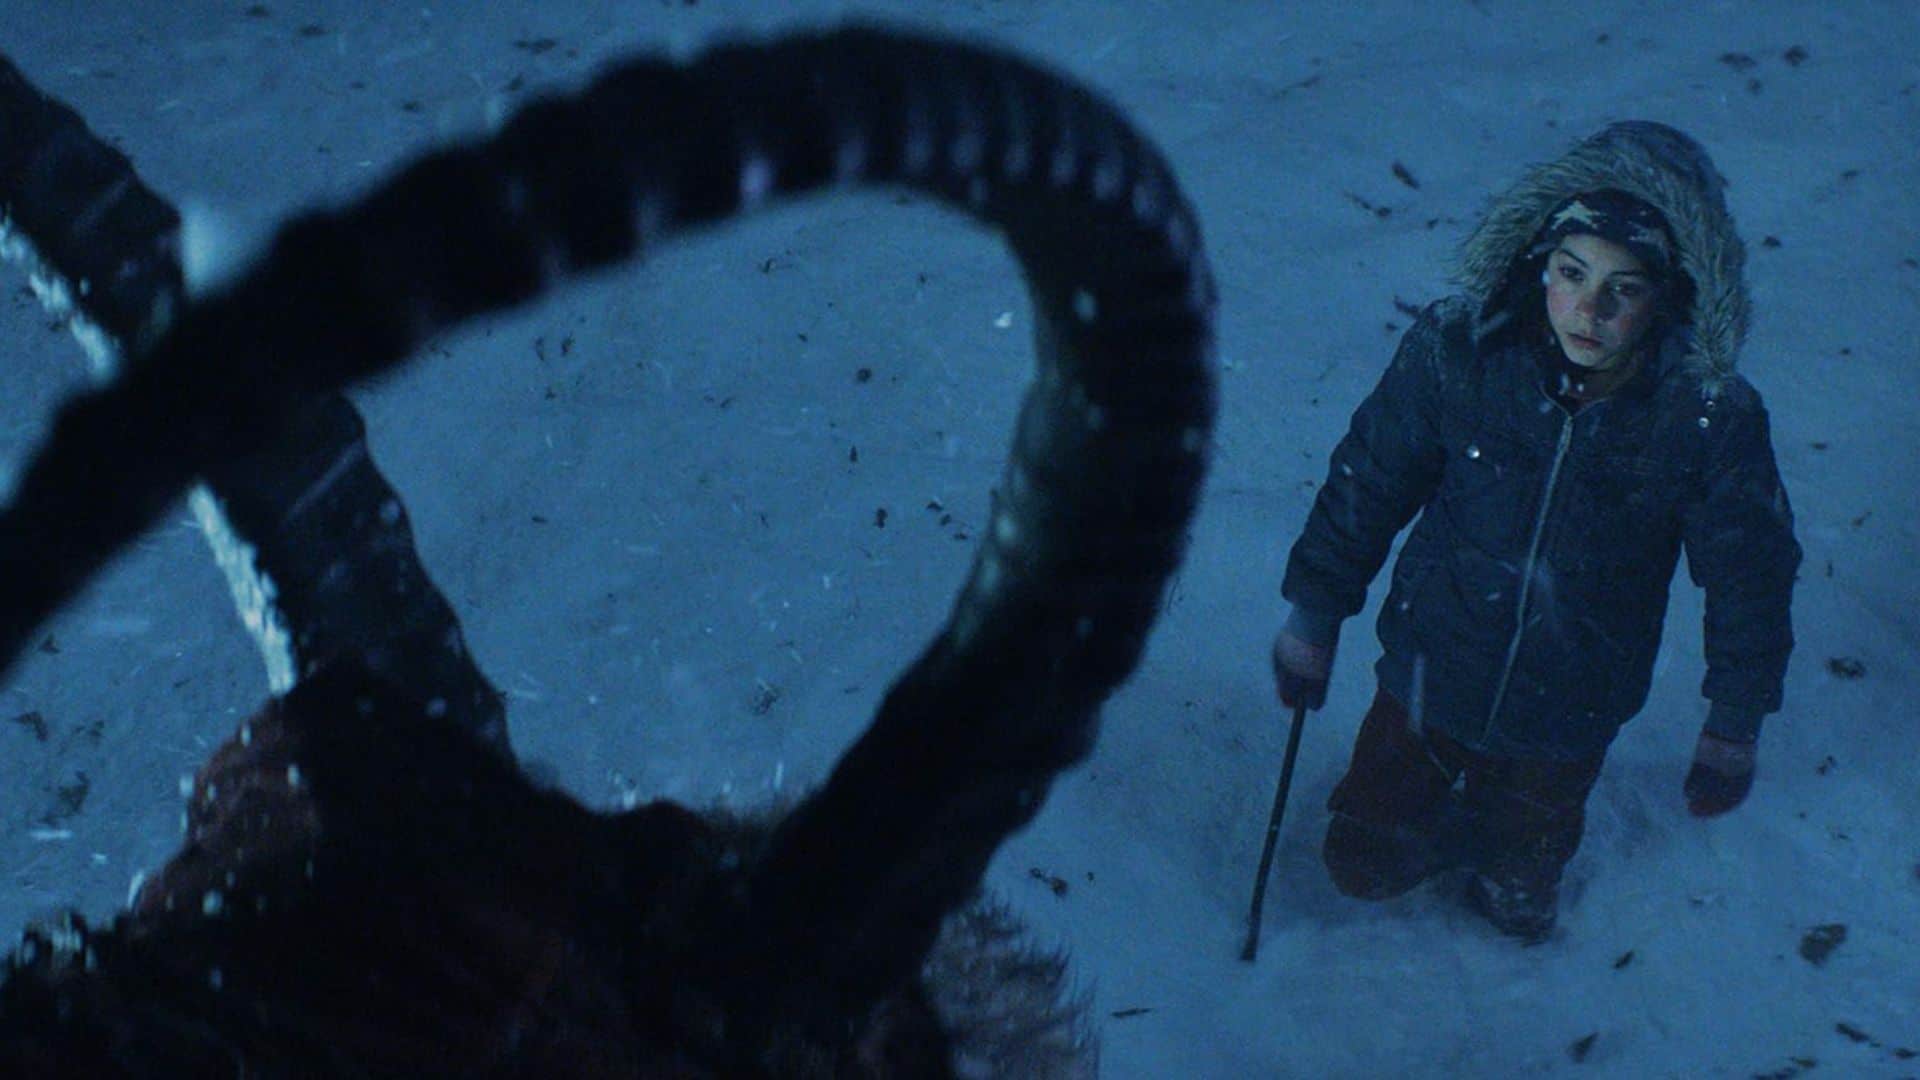  A boy looks up at Krampus in this image from Legendary Pictures.